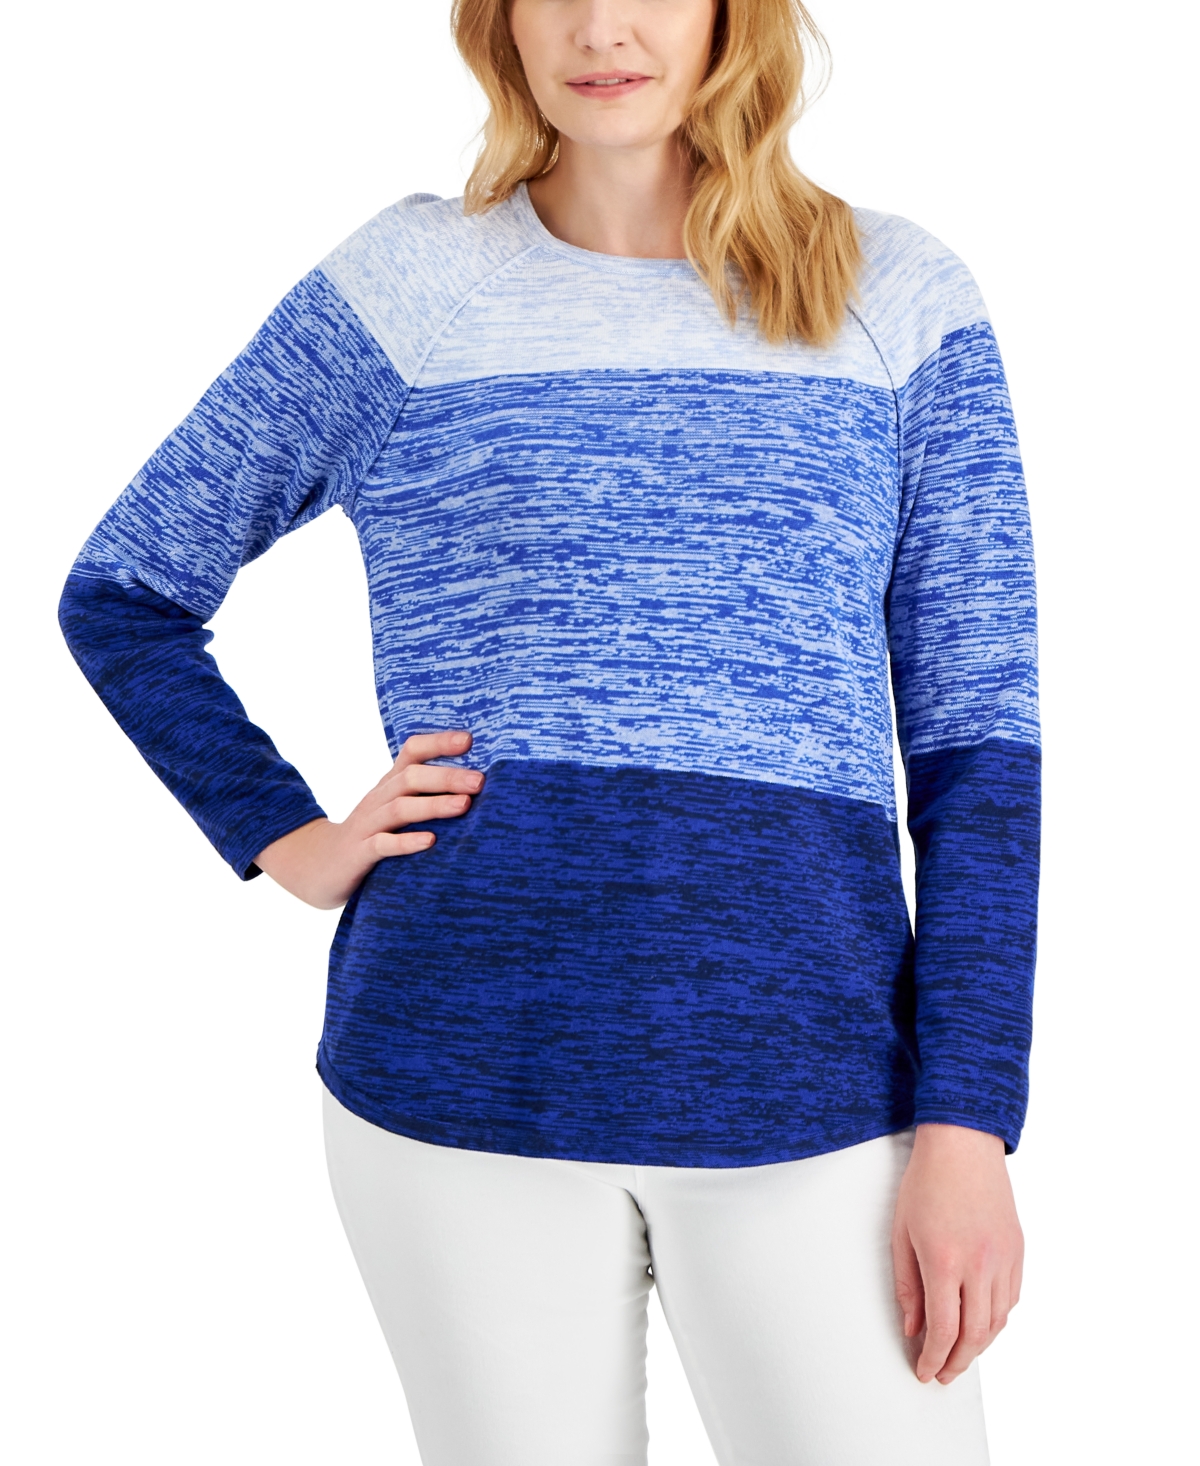 Women's Cotton Colorblocked Sweater, Created for Macy's - Intrepid Blue